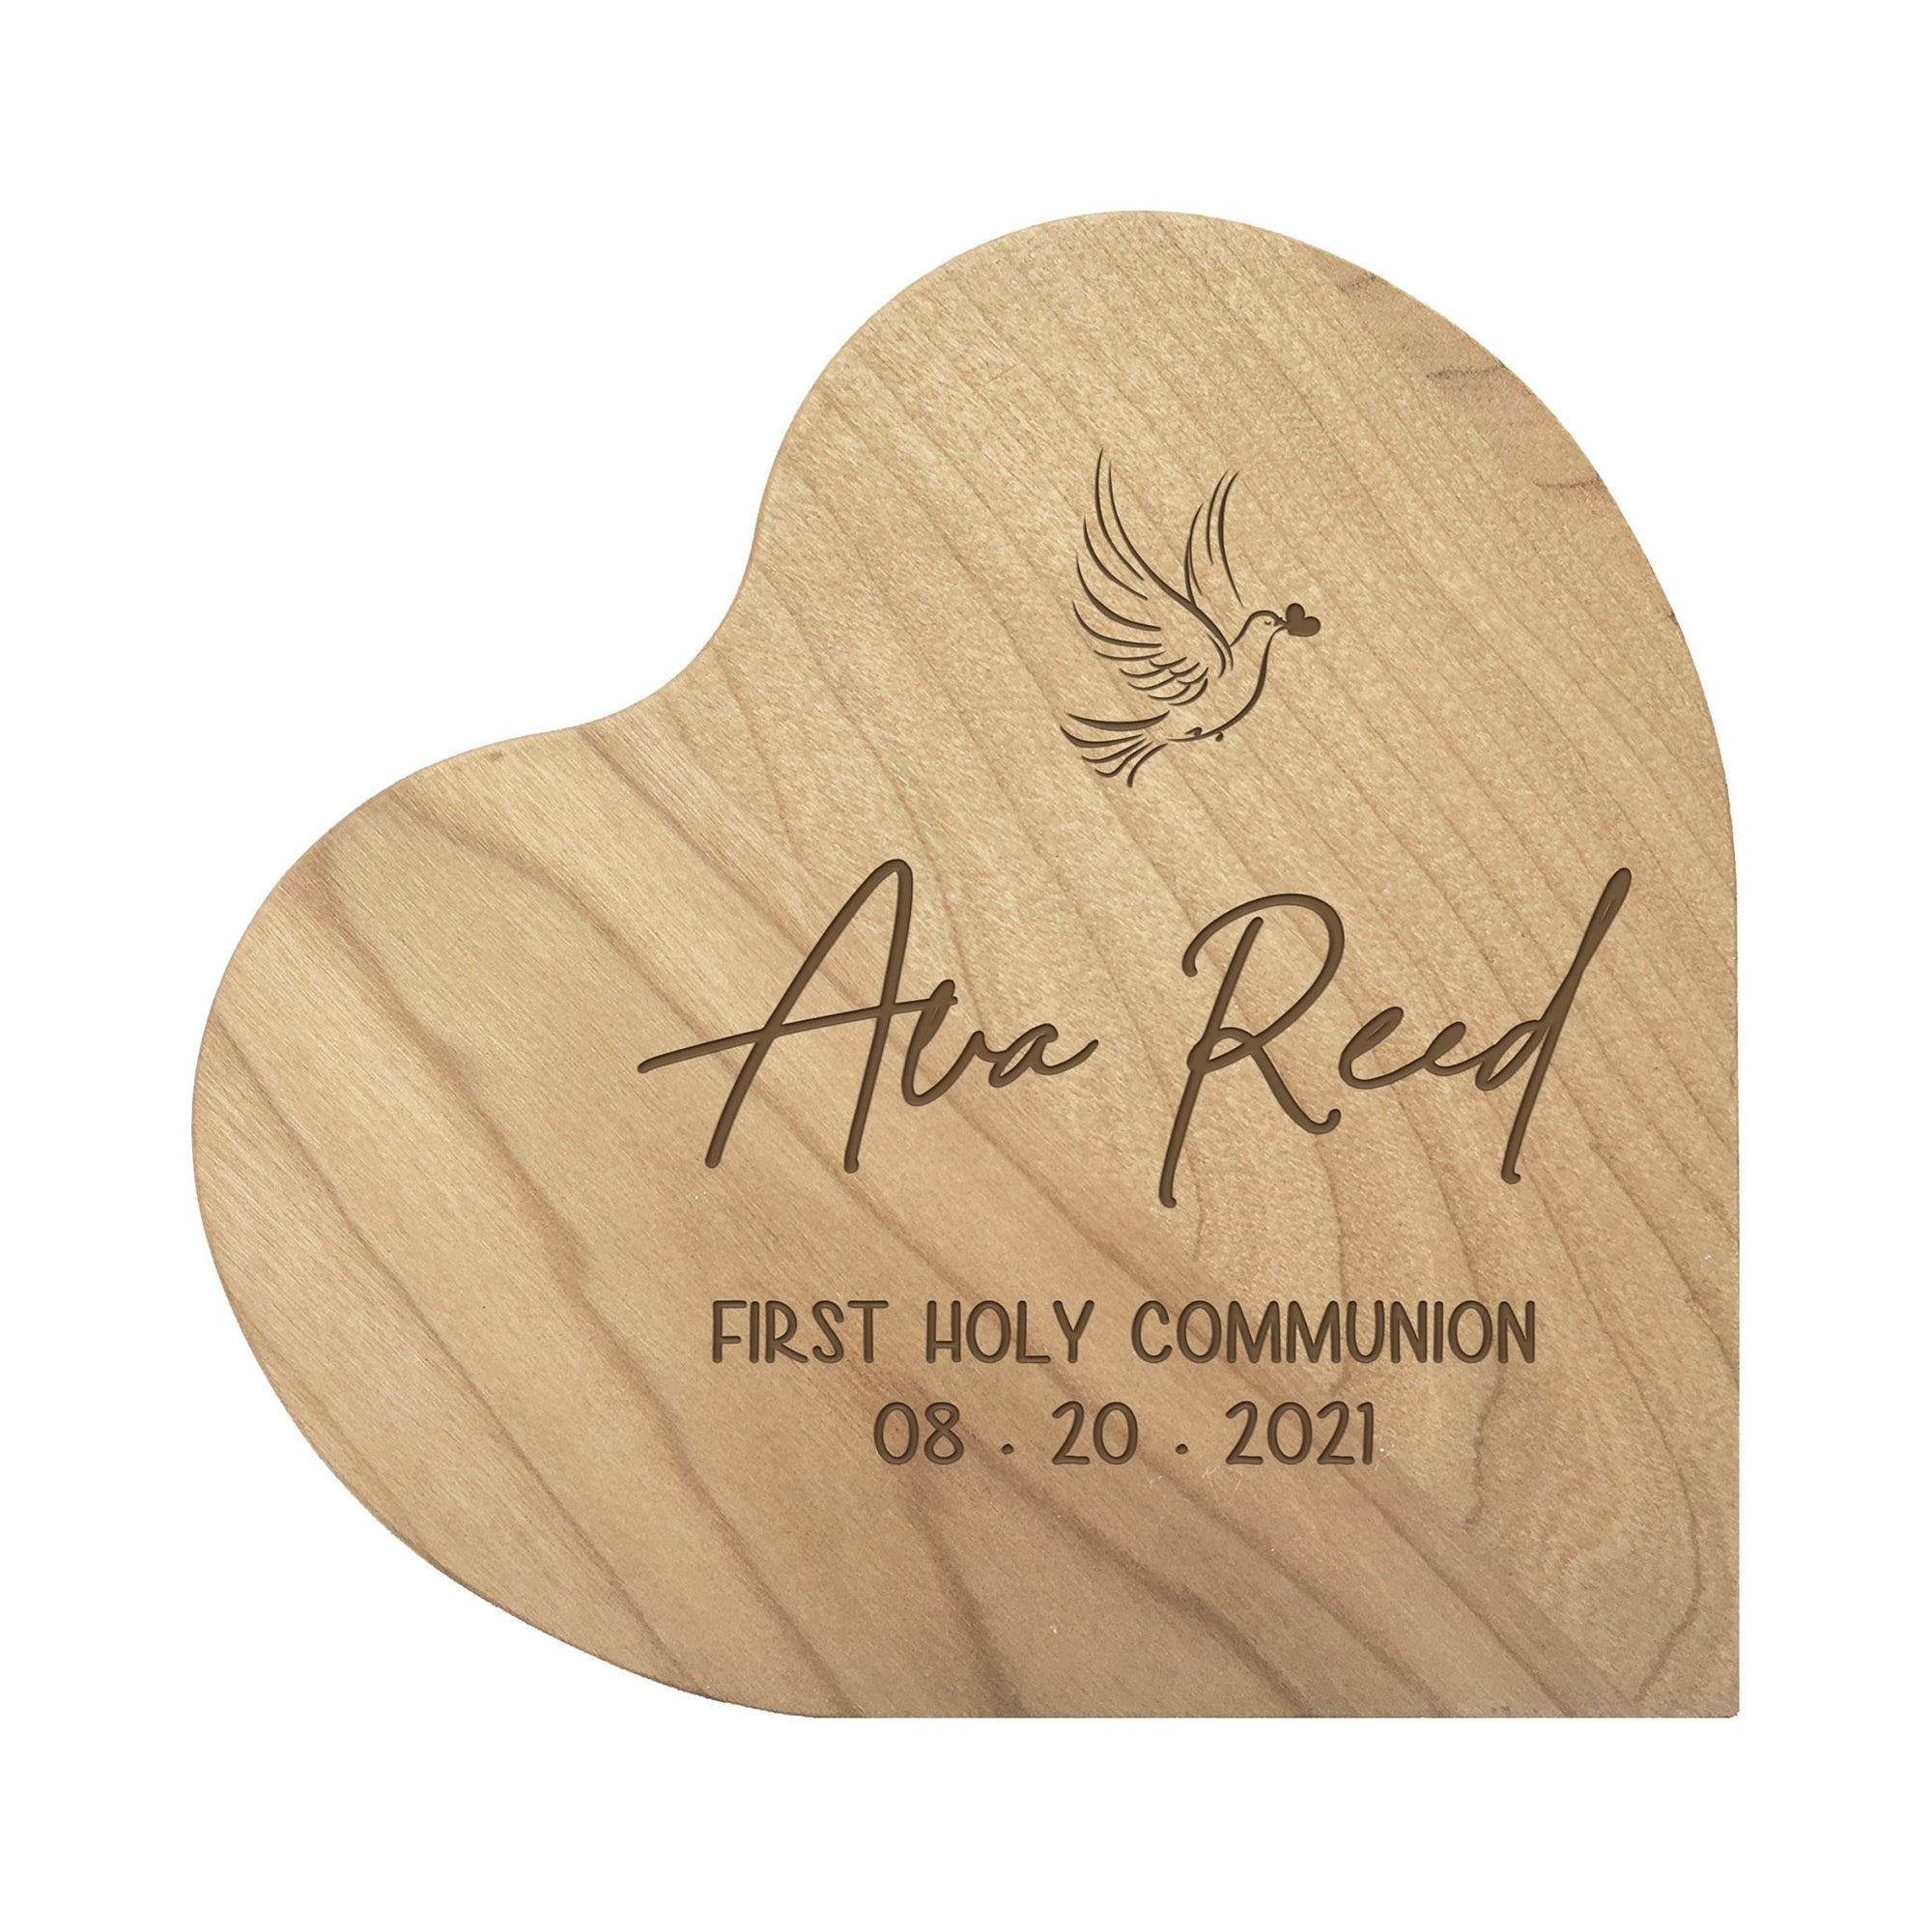 Personalized Solid Wood Heart Decoration With Inspirational Verse Keepsake Gift 5x5.25 - First Holy Communion - LifeSong Milestones